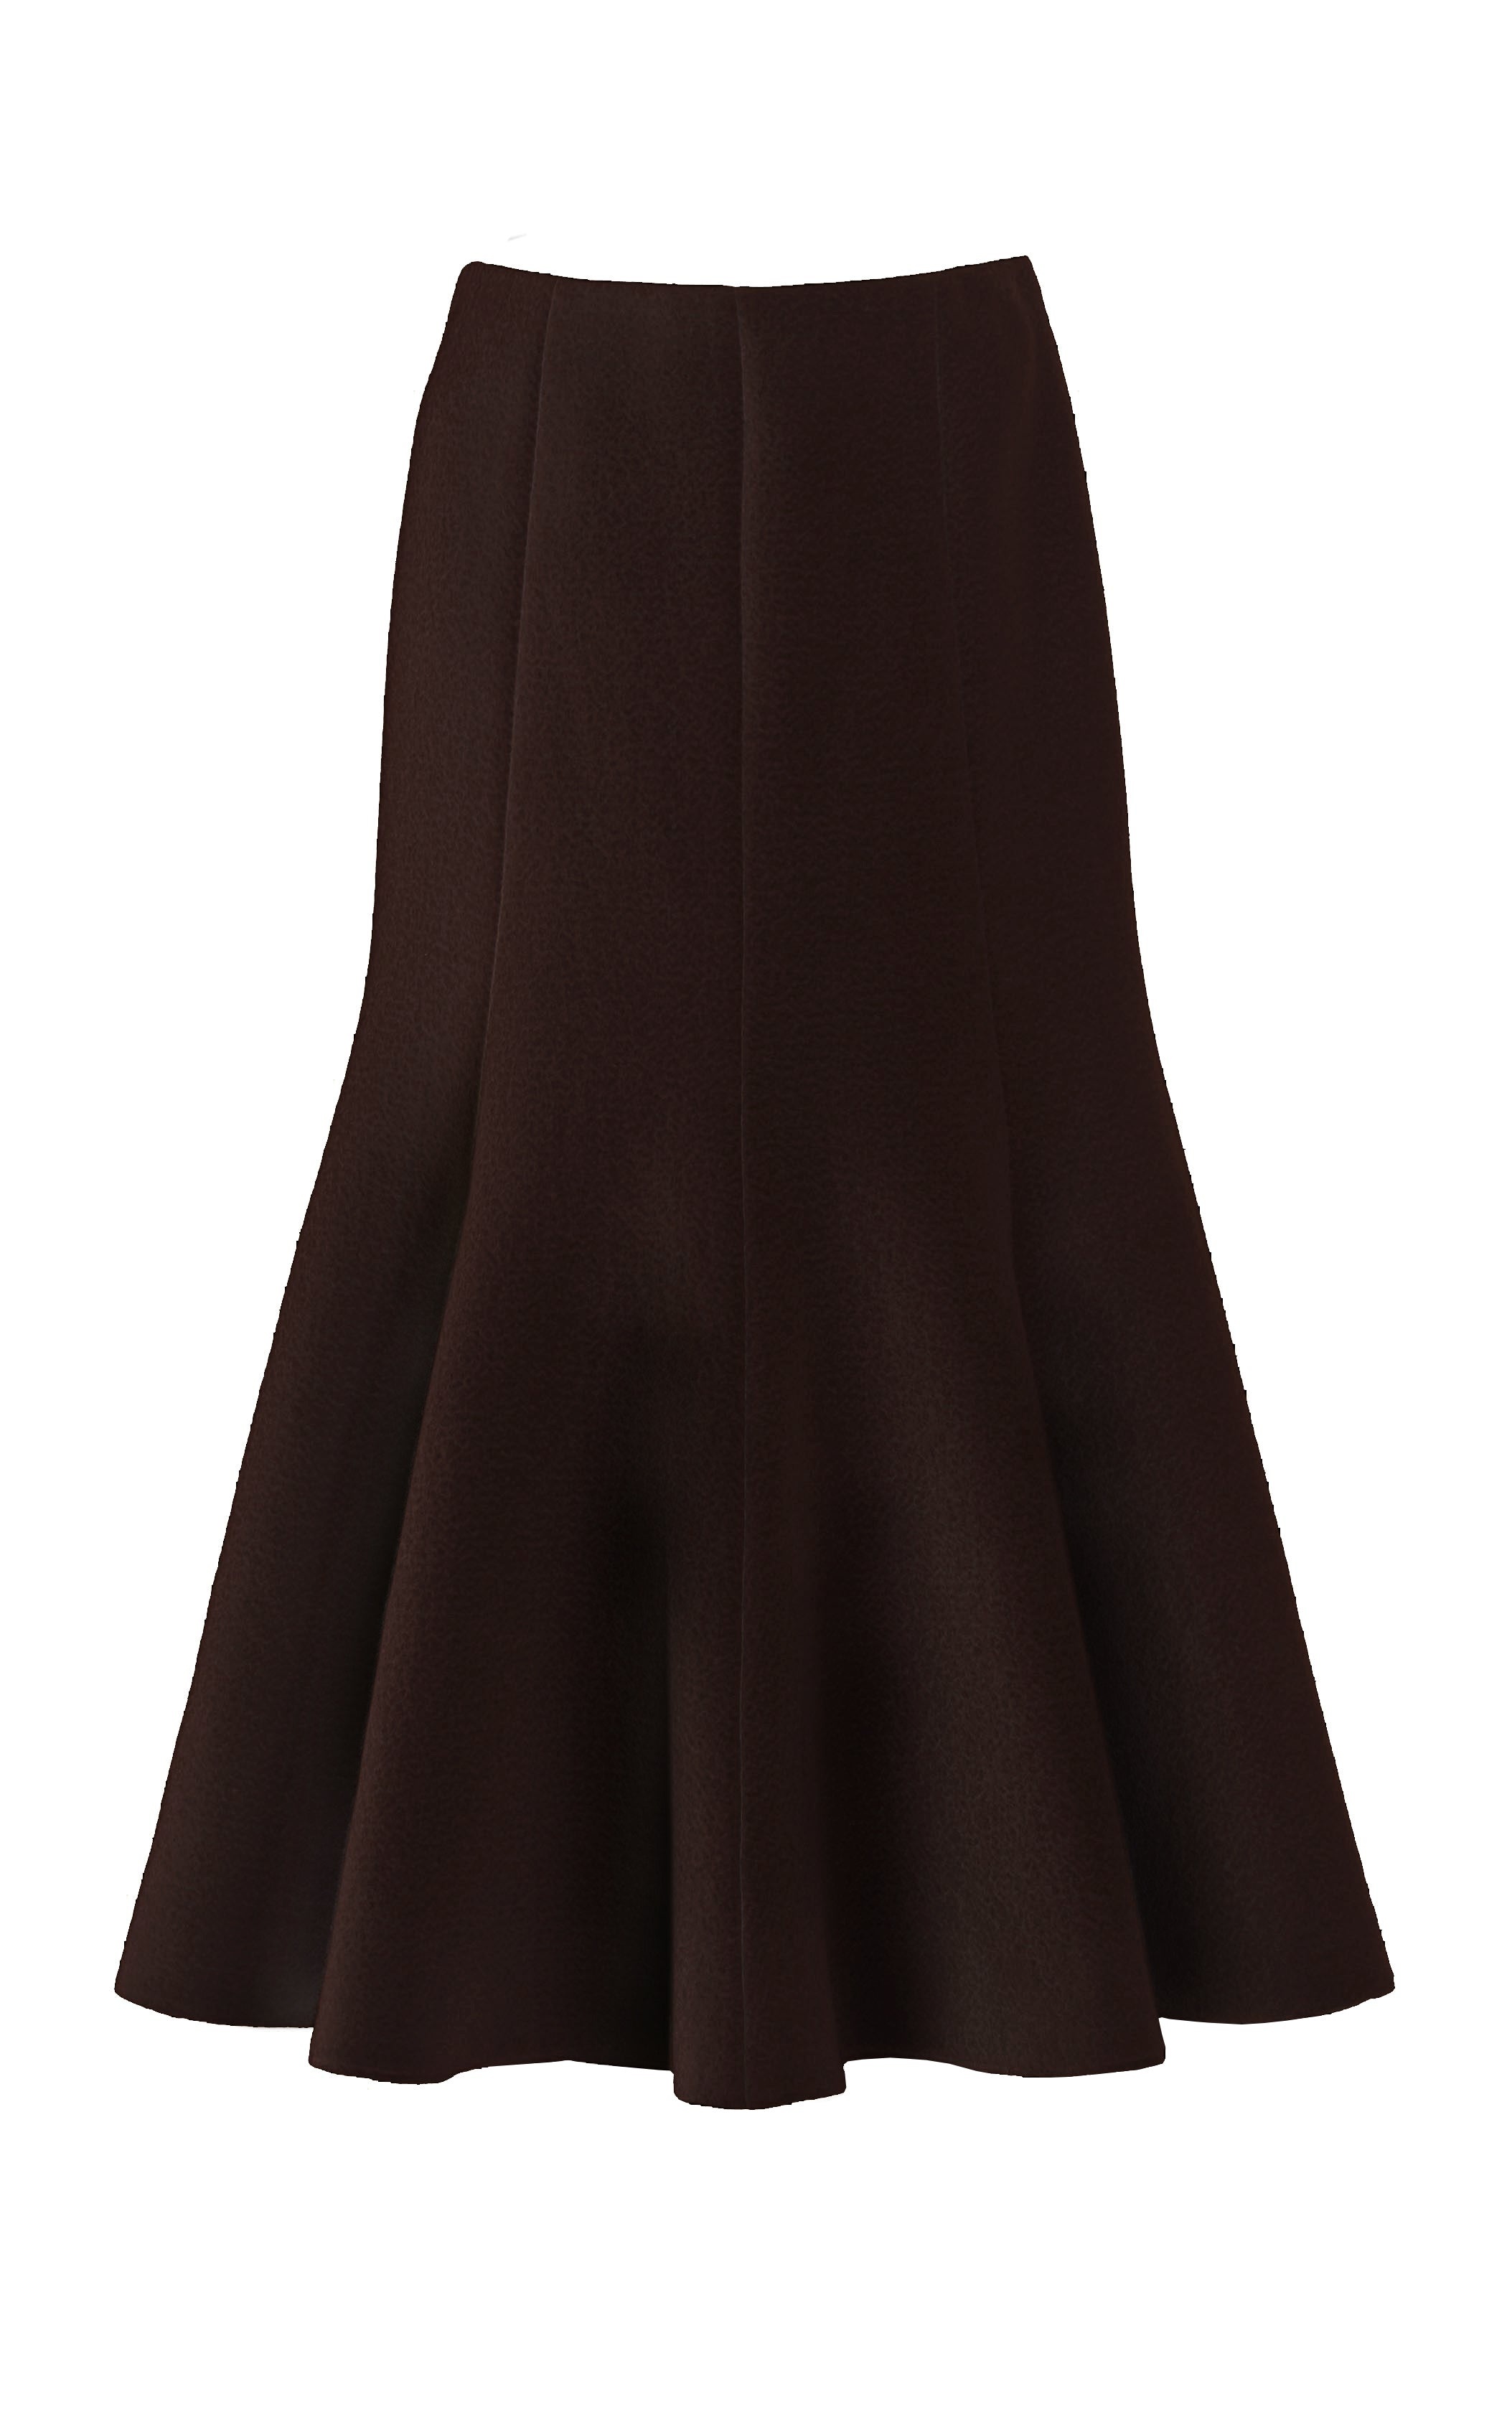 Amy Skirt in Recycled Cashmere Felt - 1